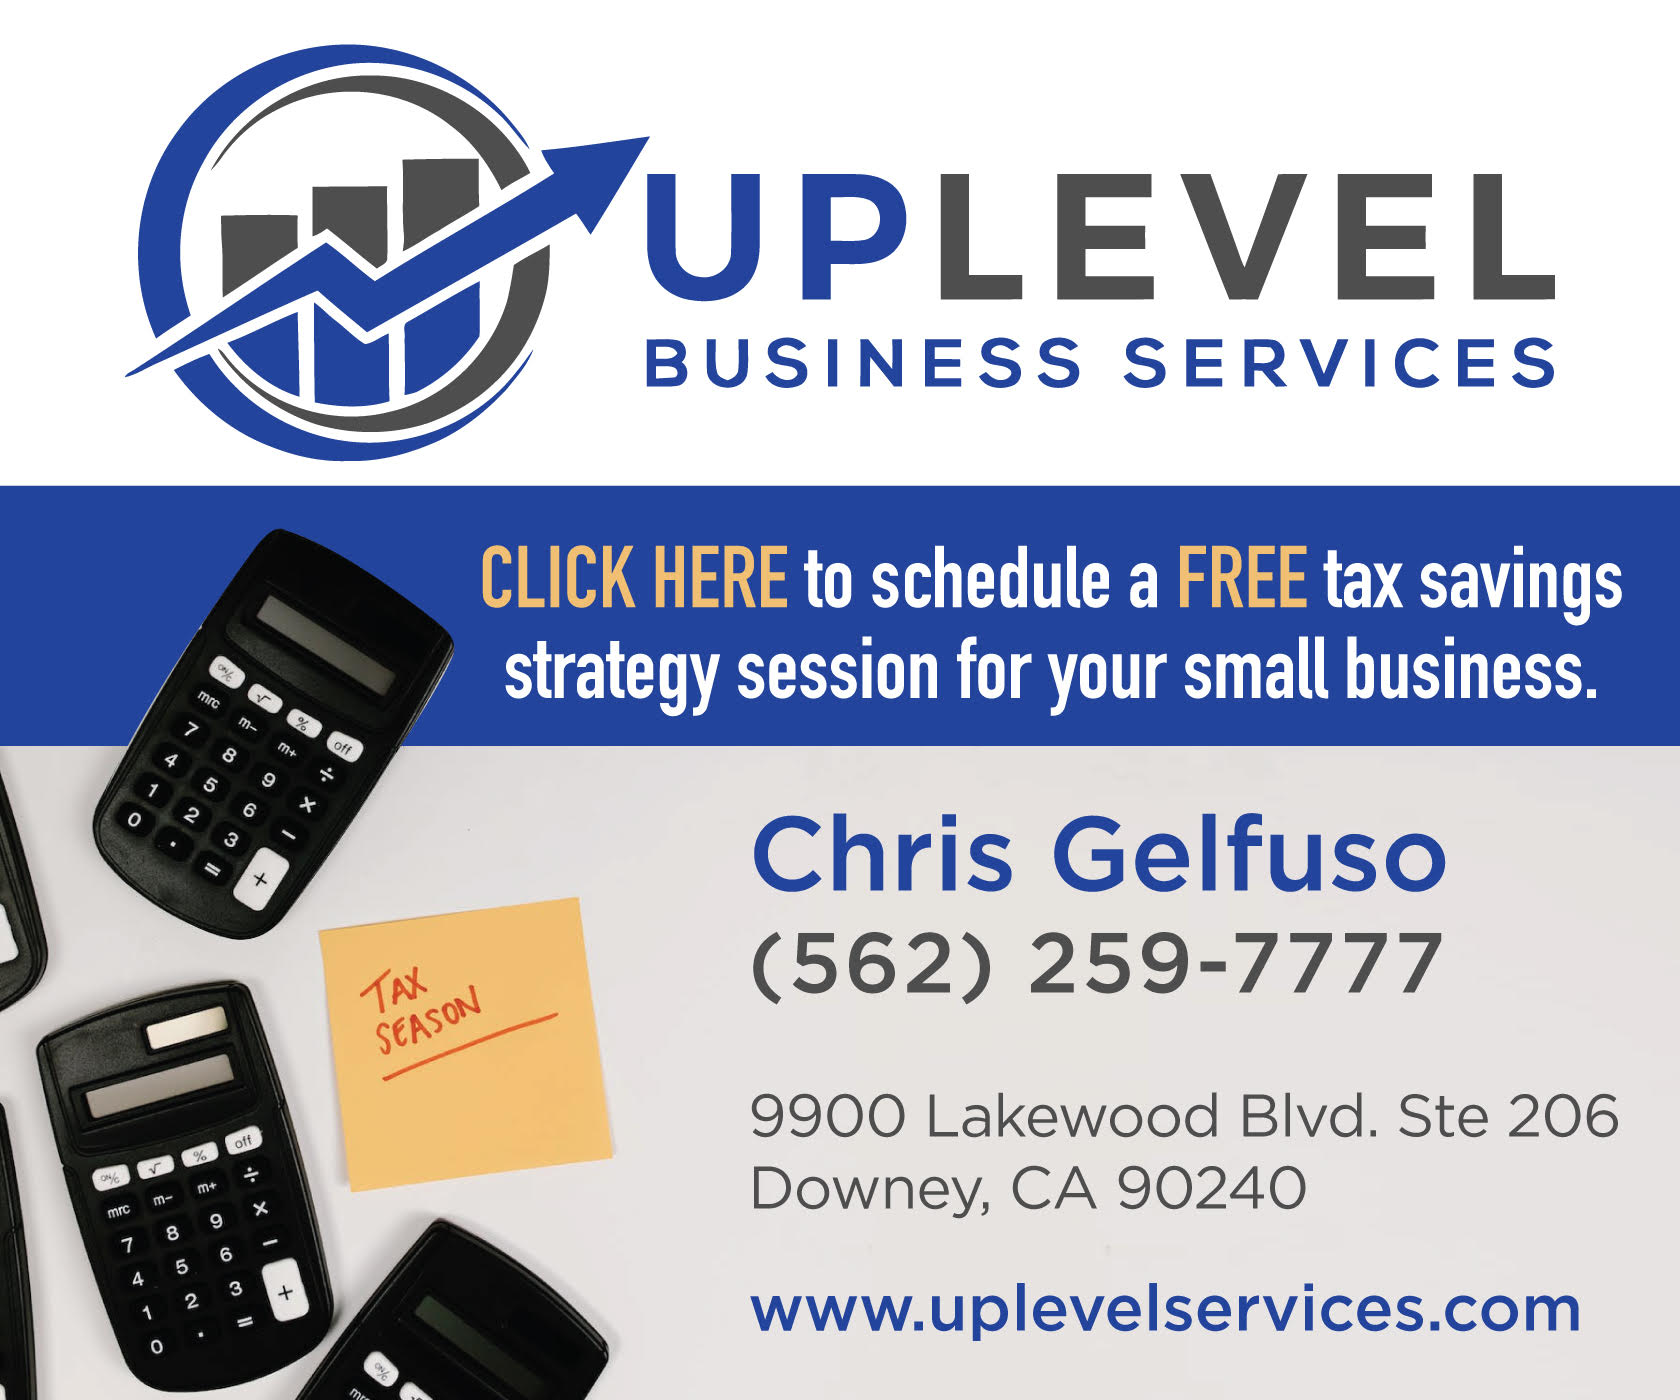 Schedule your free tax savings session